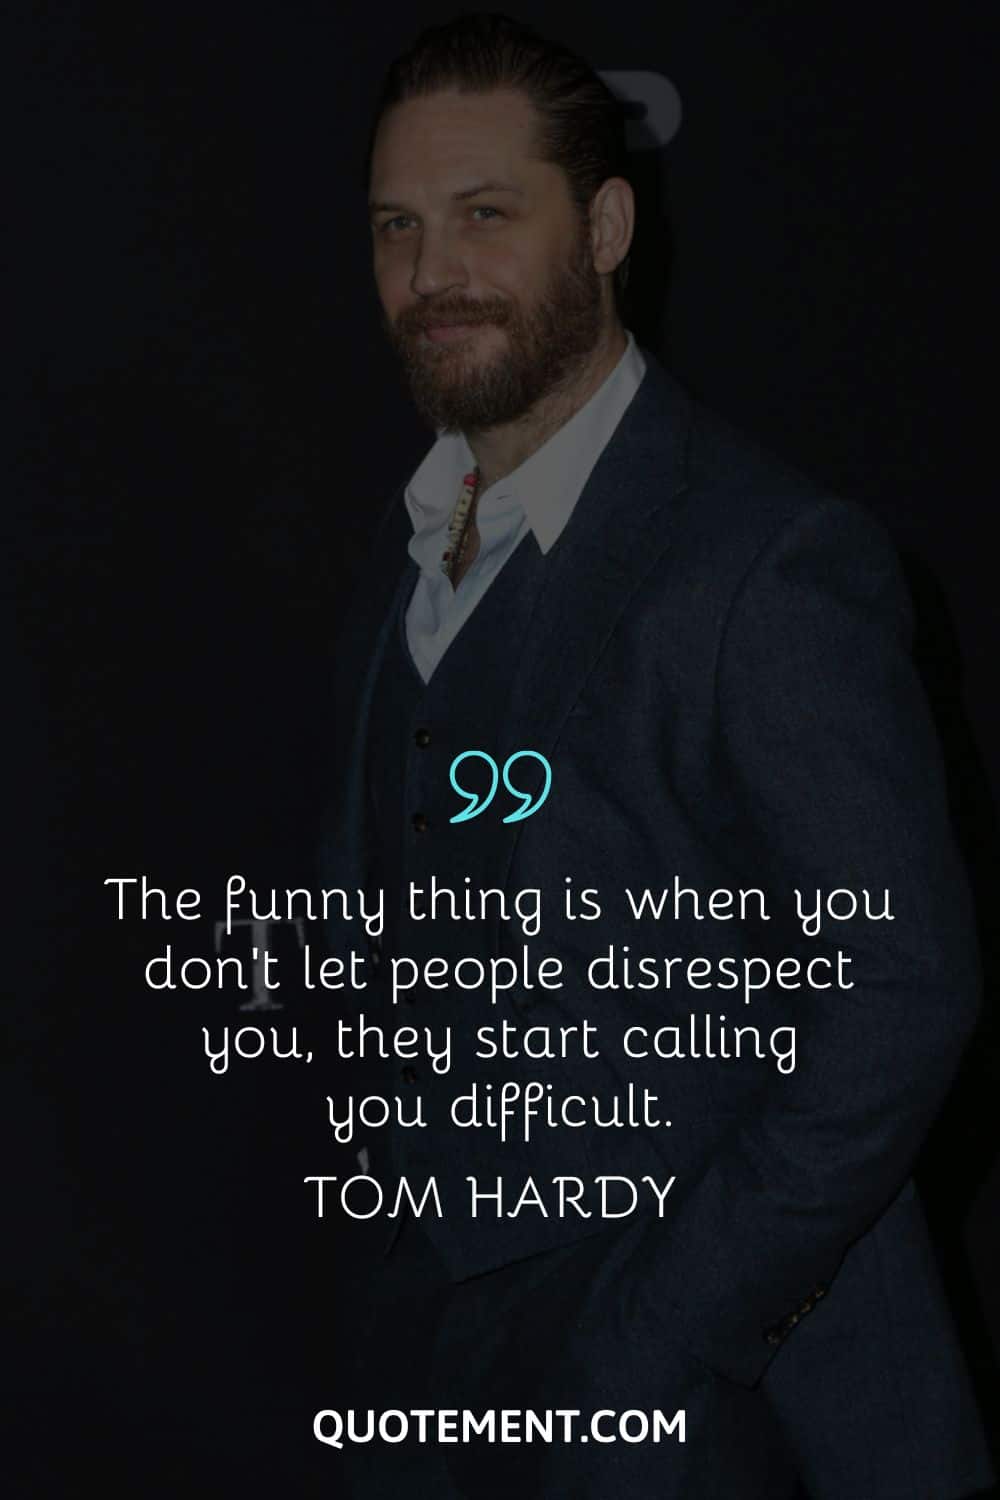 image of tom hardy representing tom hardy quote